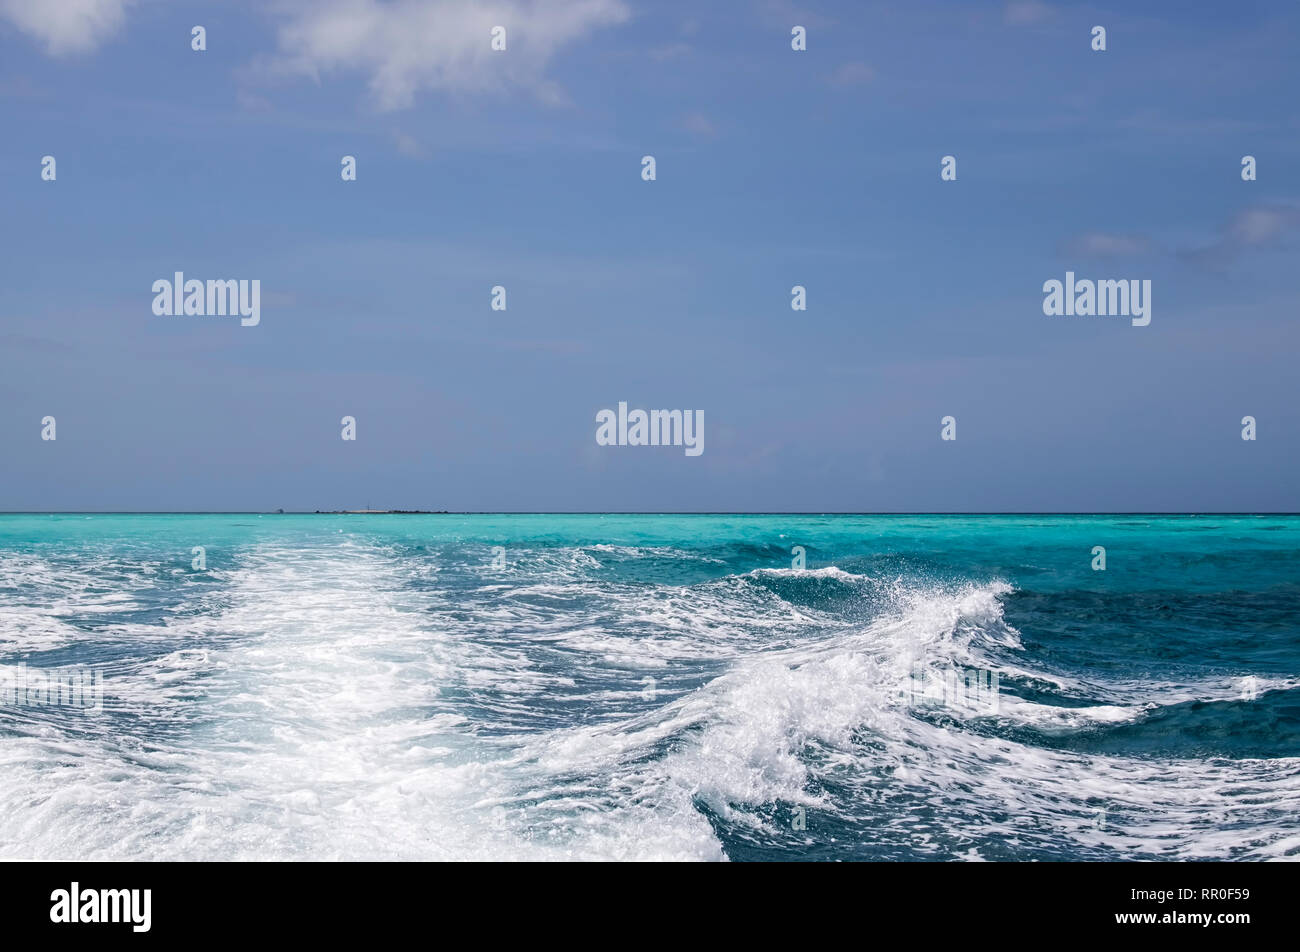 Several shades of blue with white boat wake on ocean surface under blue sky with clouds. Stock Photo